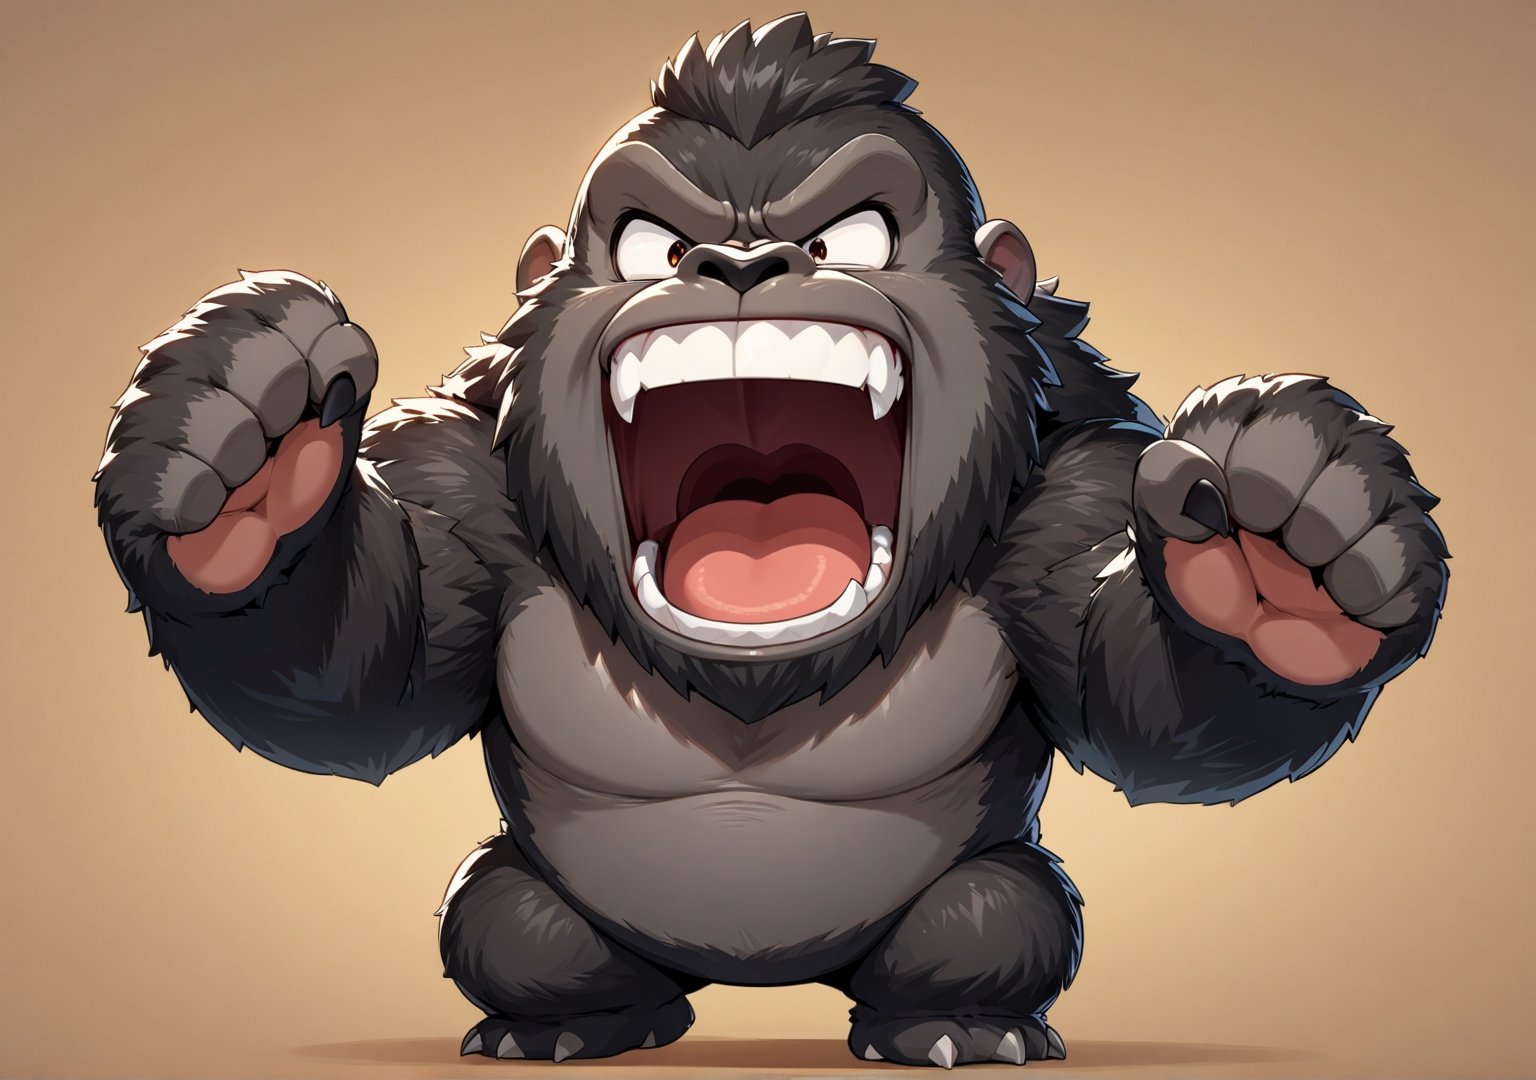 Masterpiece, 4K, ultra detailed, ((solo)), chibi anime style, furry King Kong roaring, solid background, more detail XL, SFW, 